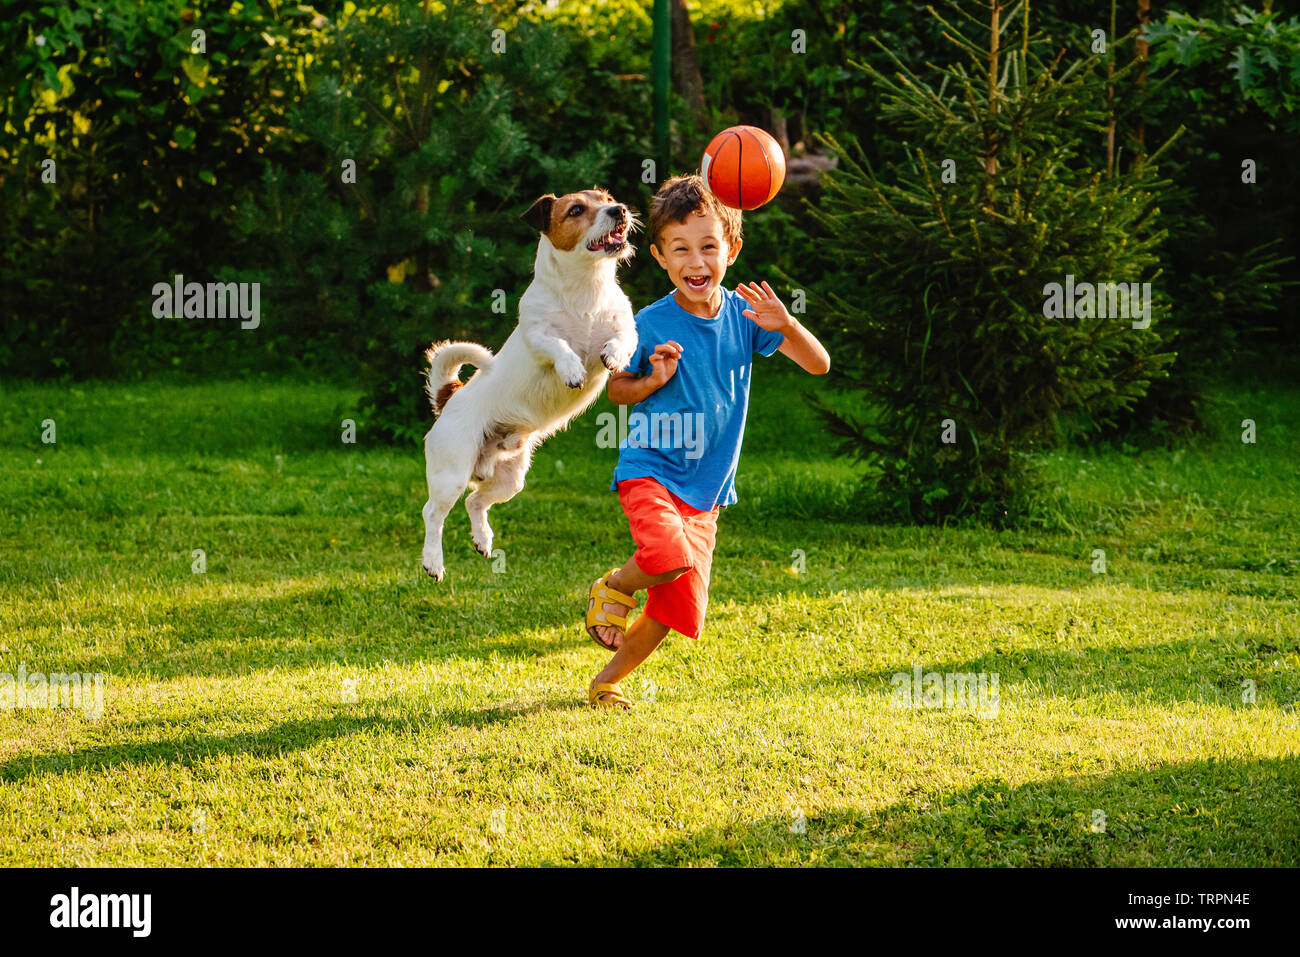 Family having fun outdoor with dog and basketball ball Stock Photo